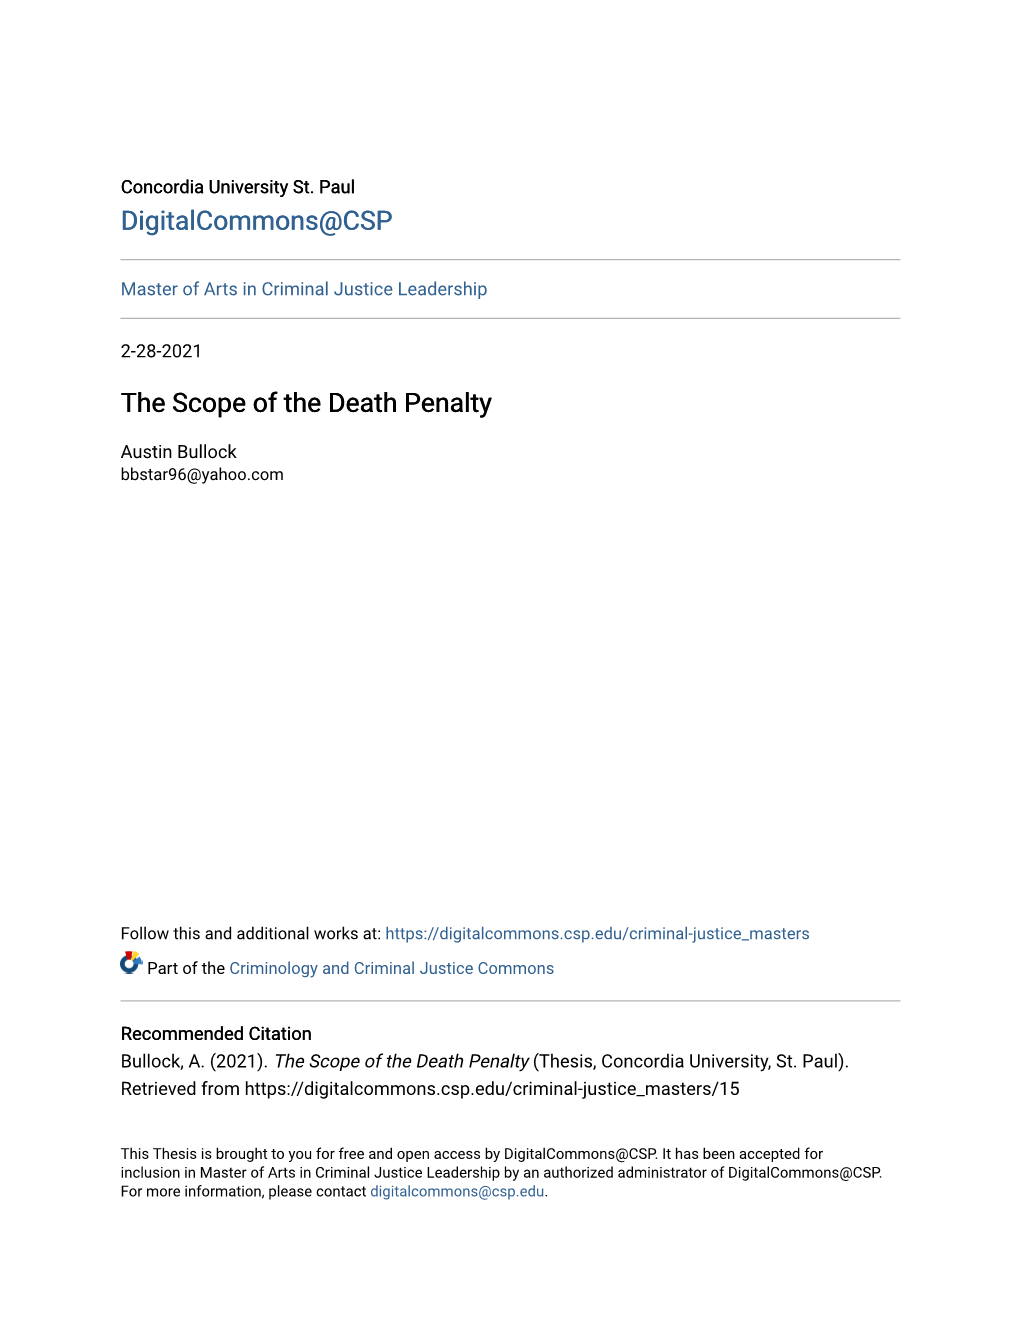 The Scope of the Death Penalty